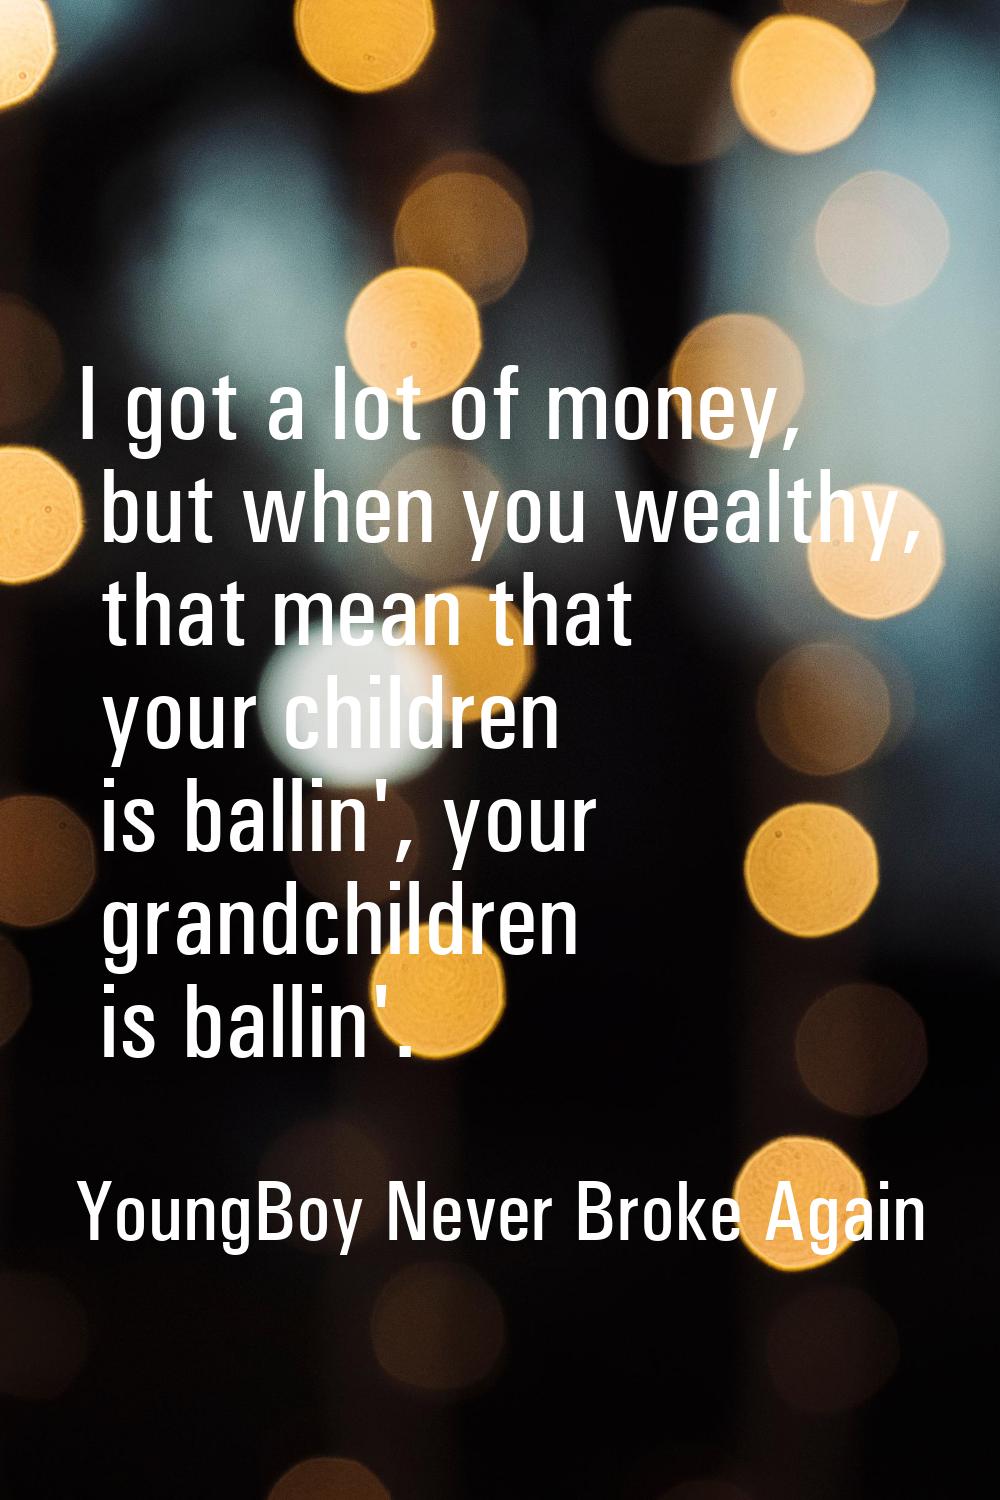 I got a lot of money, but when you wealthy, that mean that your children is ballin', your grandchil